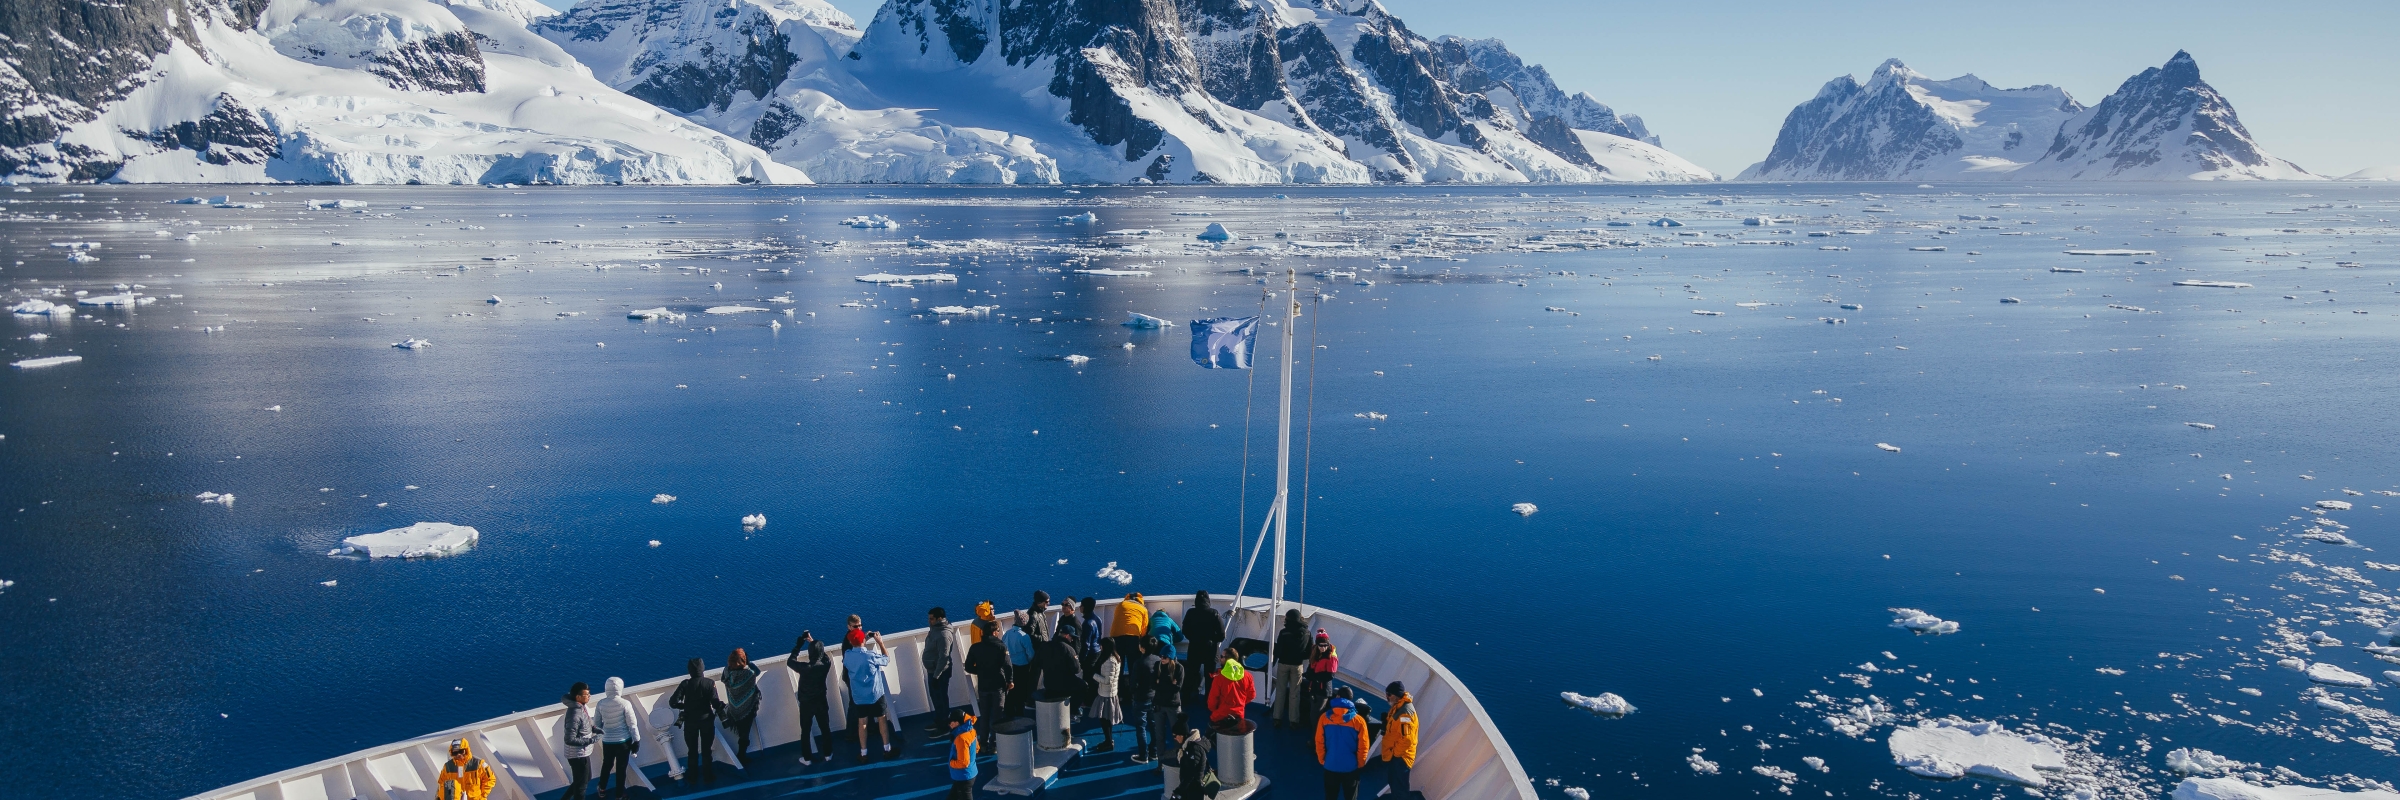 Explore the Antarctic aboard Quark Expeditions' fleet of expedition vessels.